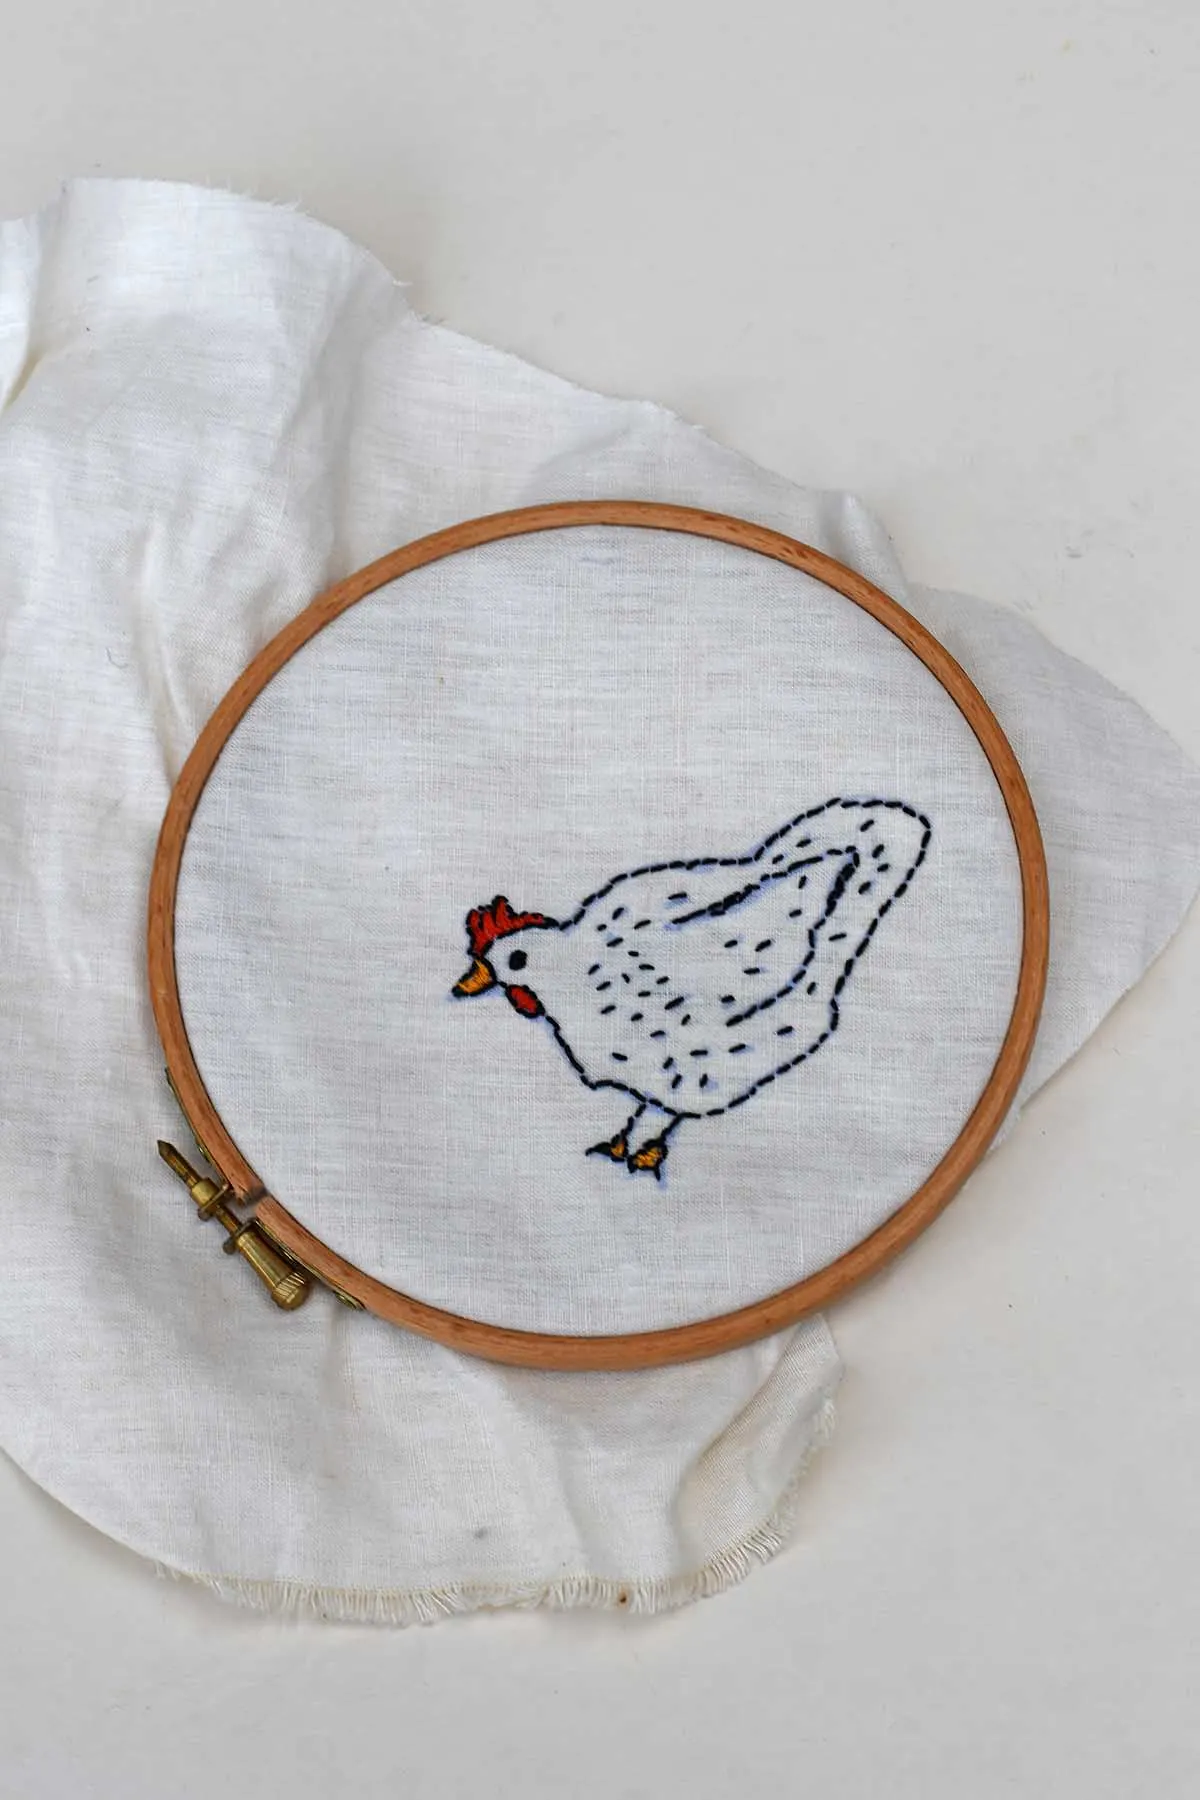 finished-hen-embroidery-Pm.jpg